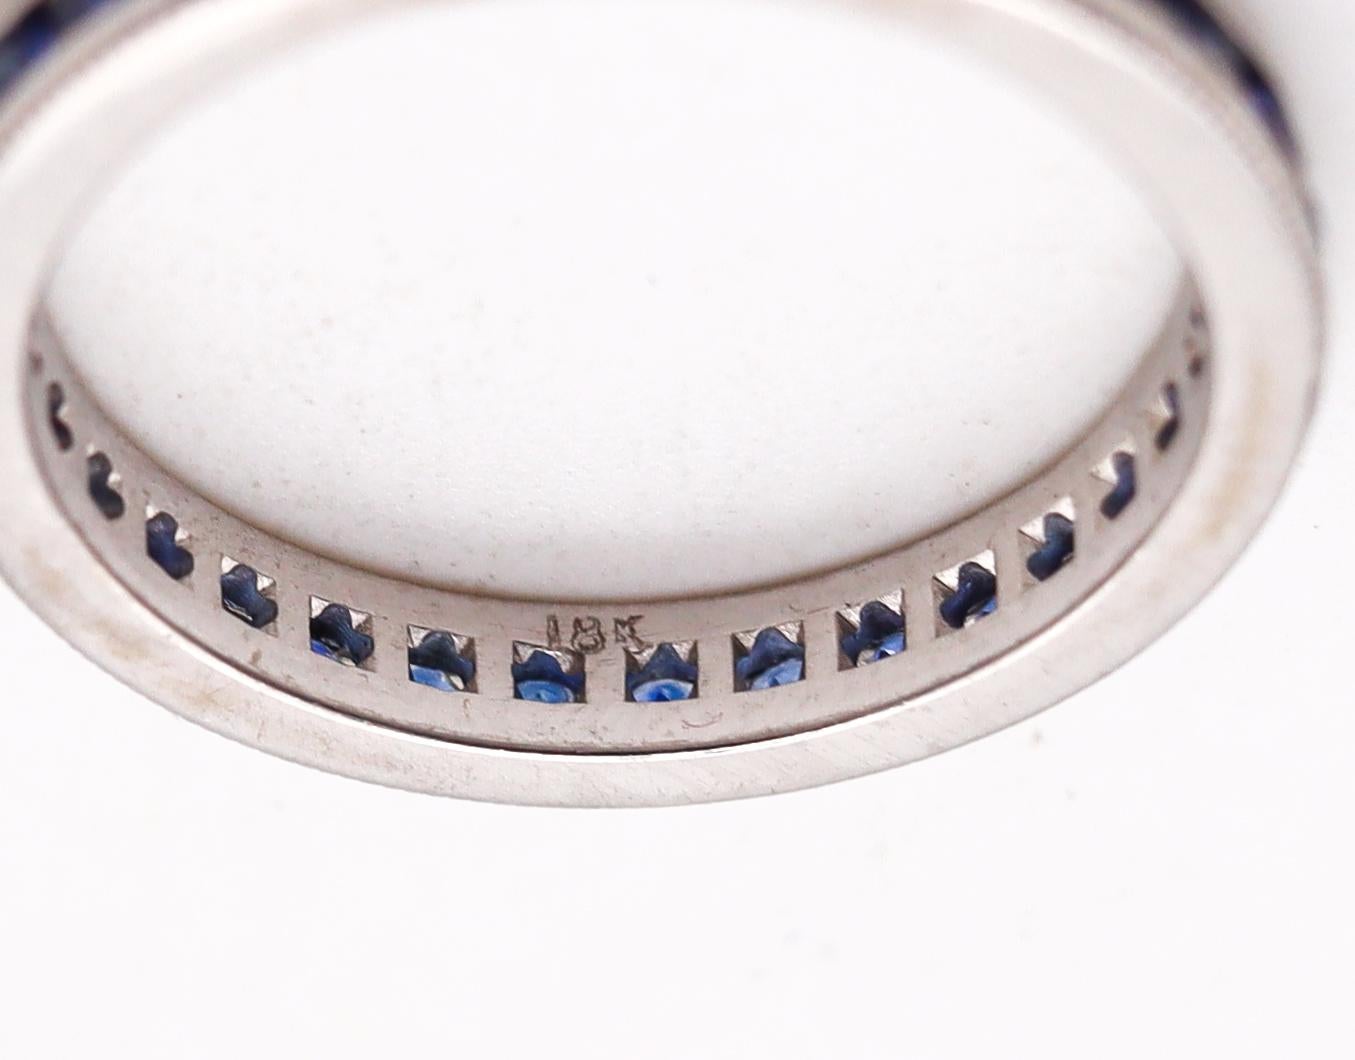 Brilliant Cut Eternity Band Ring in 18Kt White Gold with 1.20 Cts in Vivid Blue Sapphires For Sale